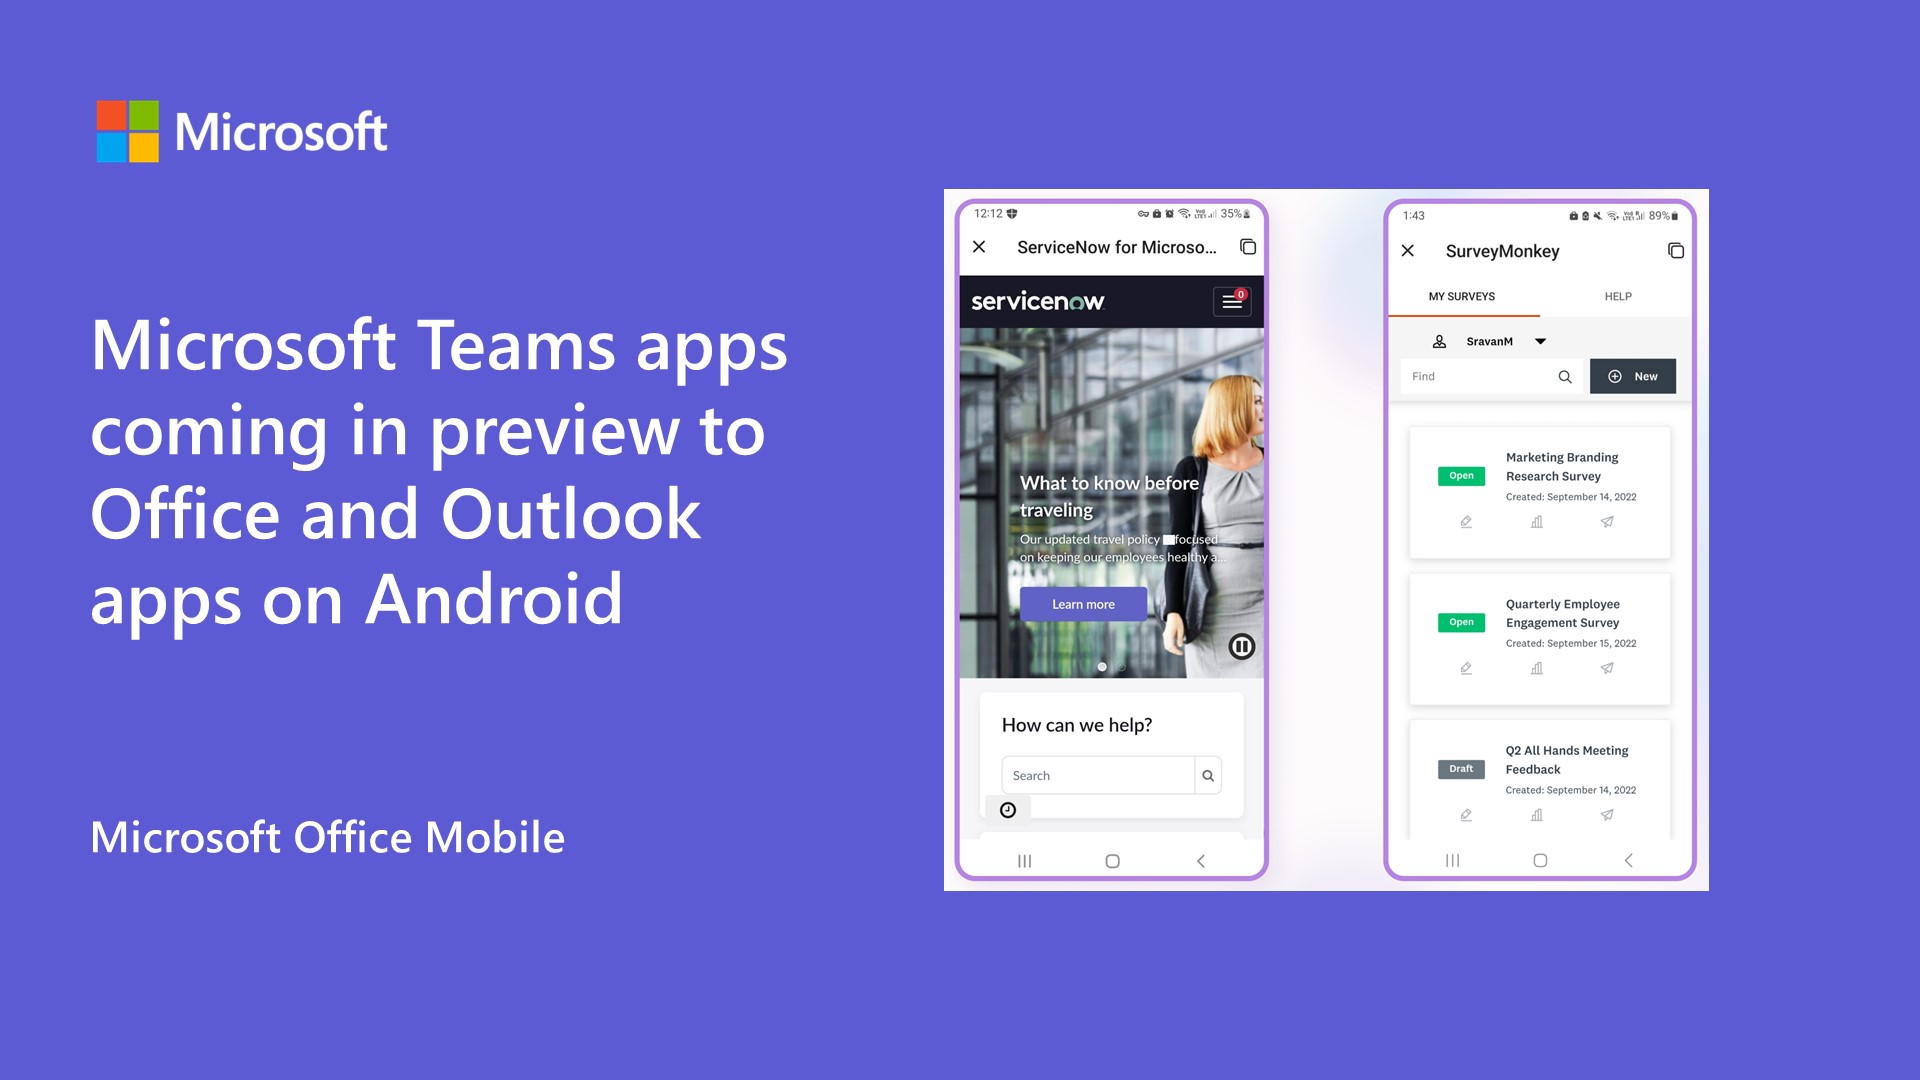 Microsoft Teams apps coming in preview to Office and Outlook apps on Android